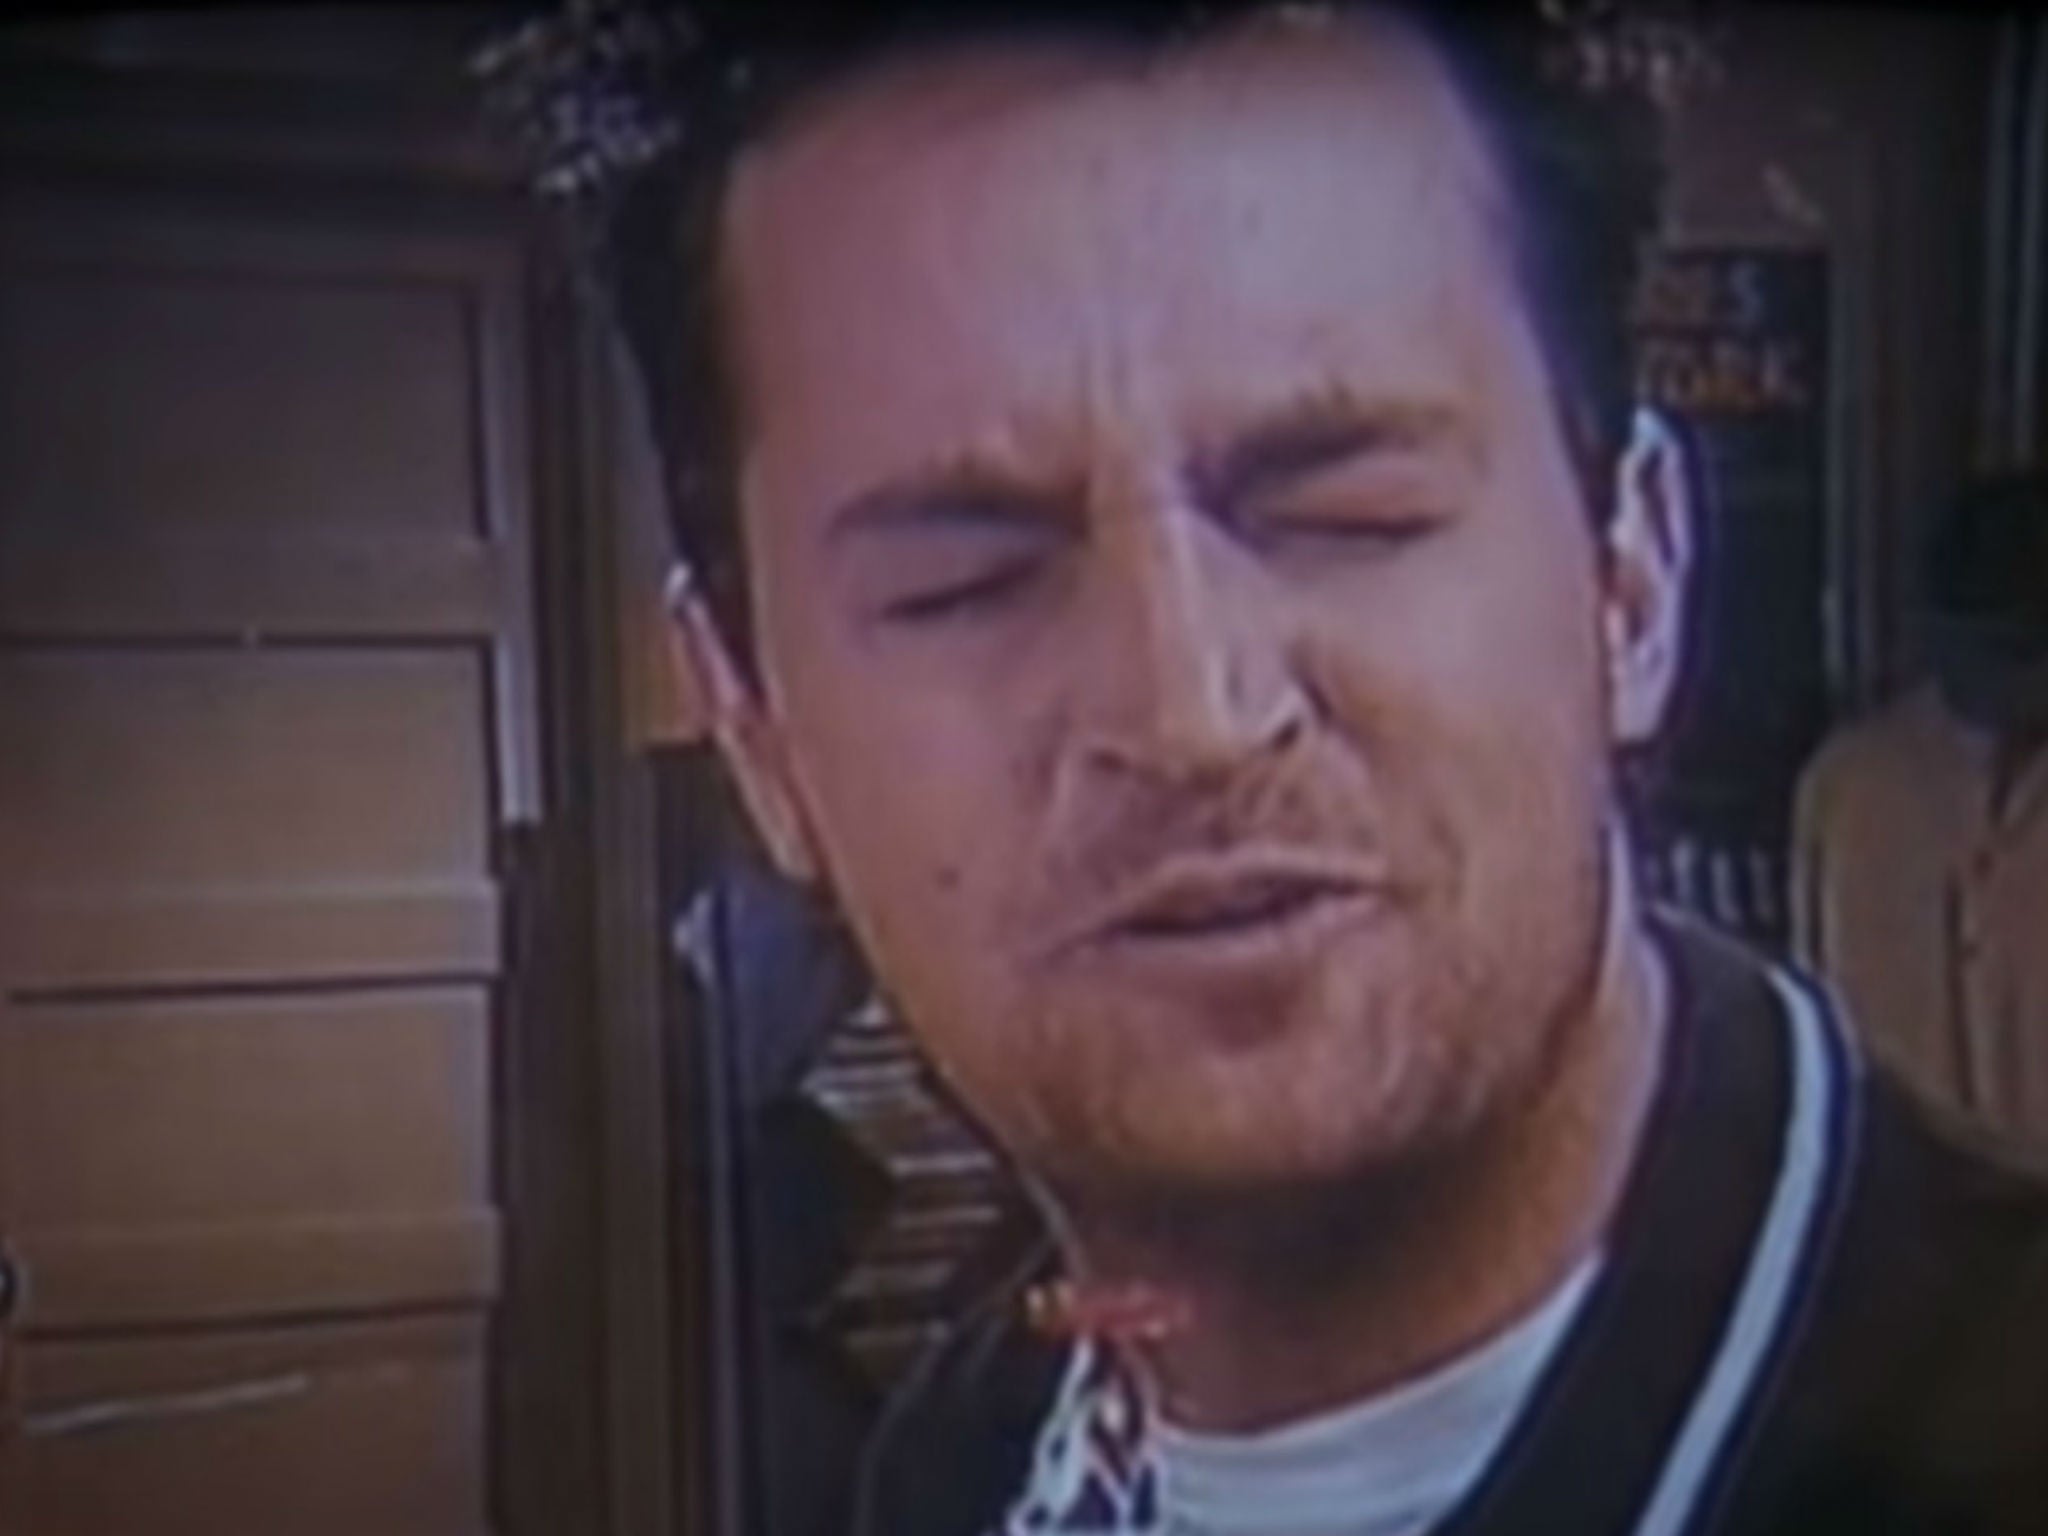 Chandler croons to 'Space Oddity' in an episode of Friends